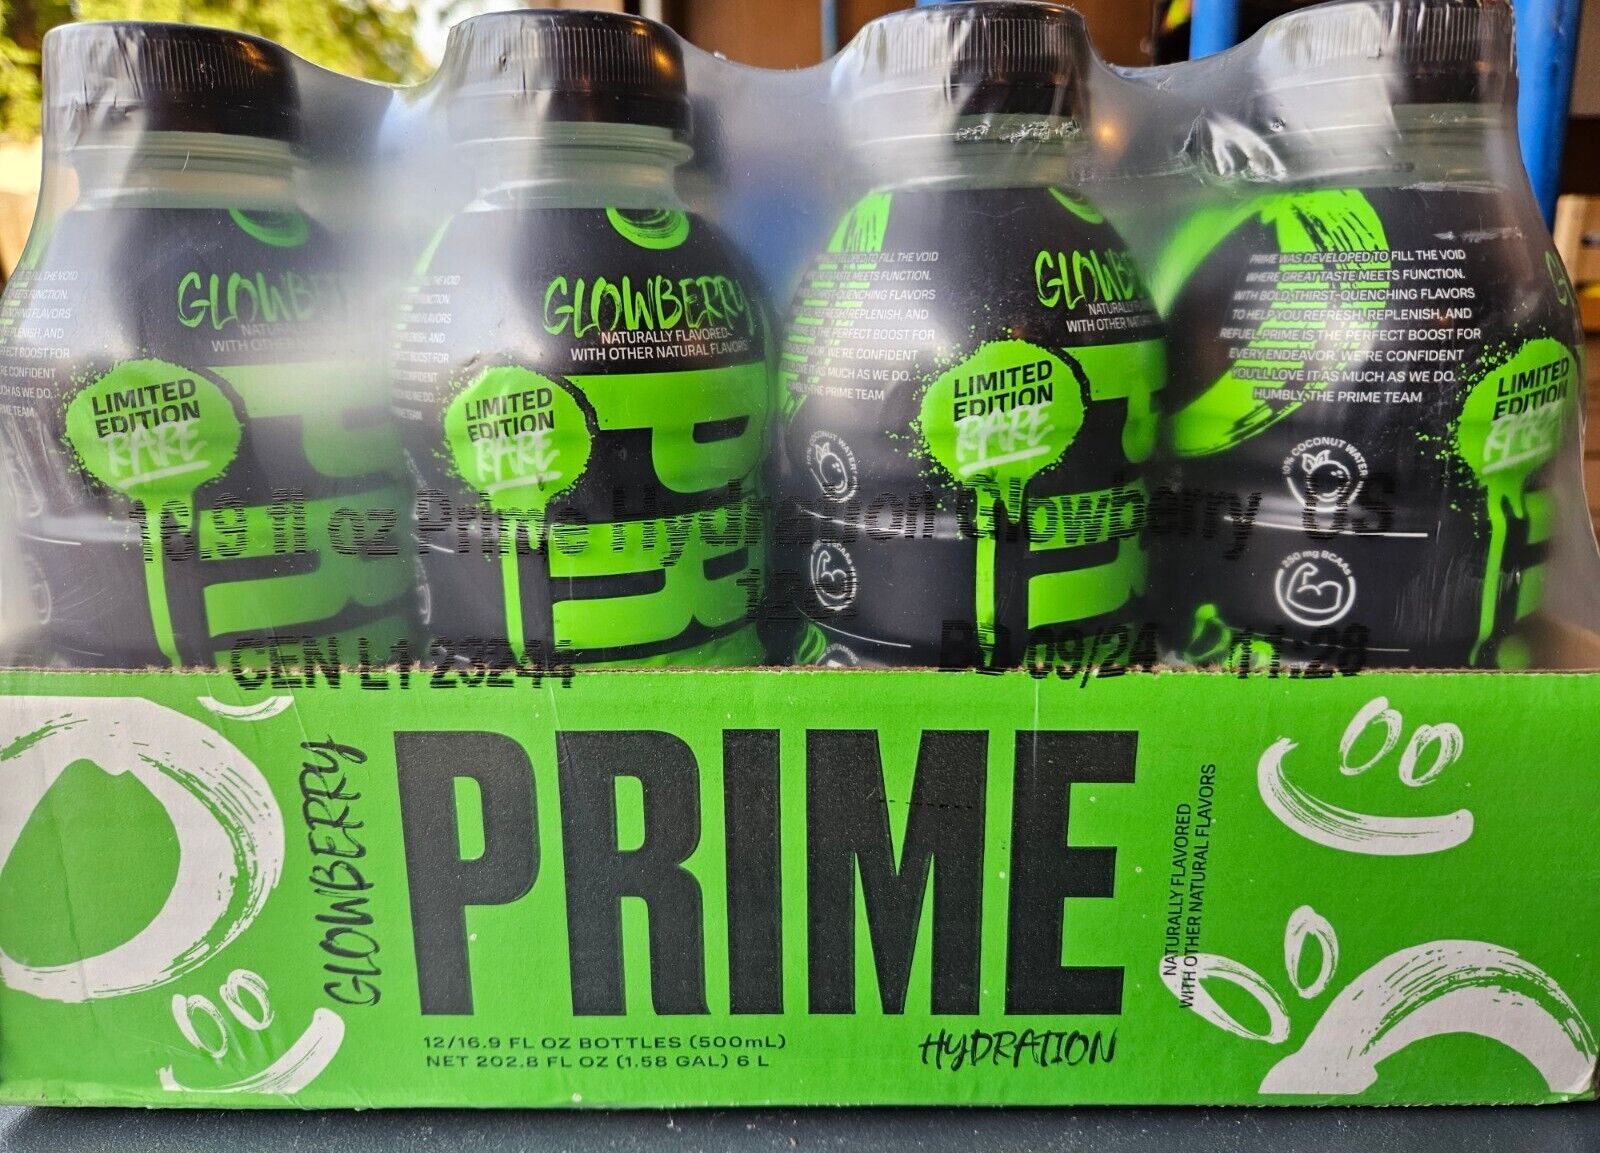 New & Sealed Full Case Of LIMITED EDITION RARE ALL 12 Prime Glowberry